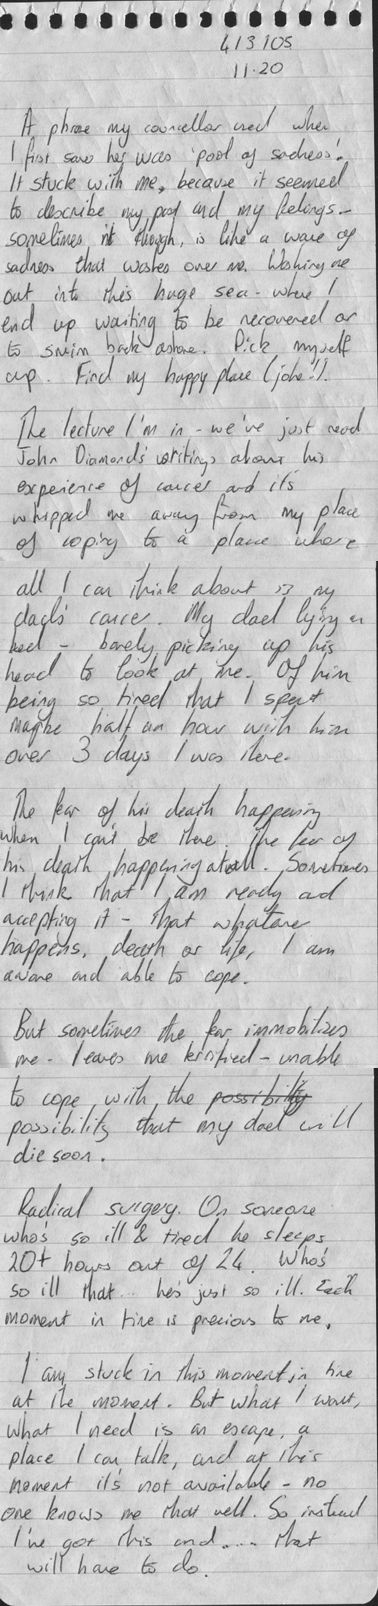 Scans from a diary entry made in my notebook 